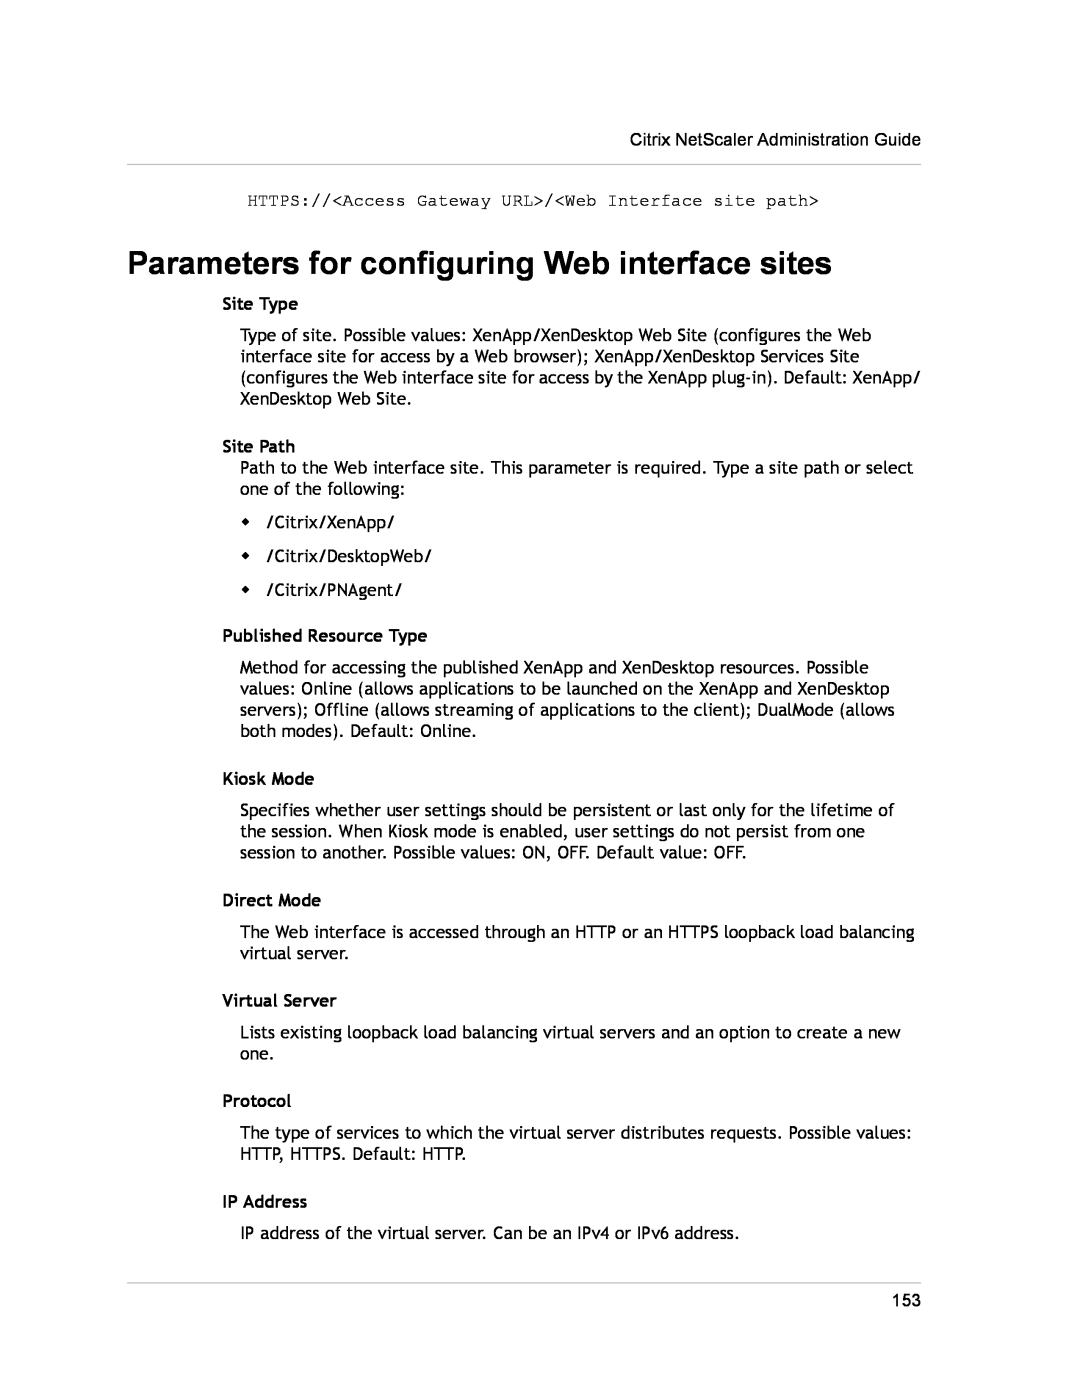 Citrix Systems CITRIX NETSCALER 9.3 manual Parameters for configuring Web interface sites, Site Type, Site Path, Kiosk Mode 